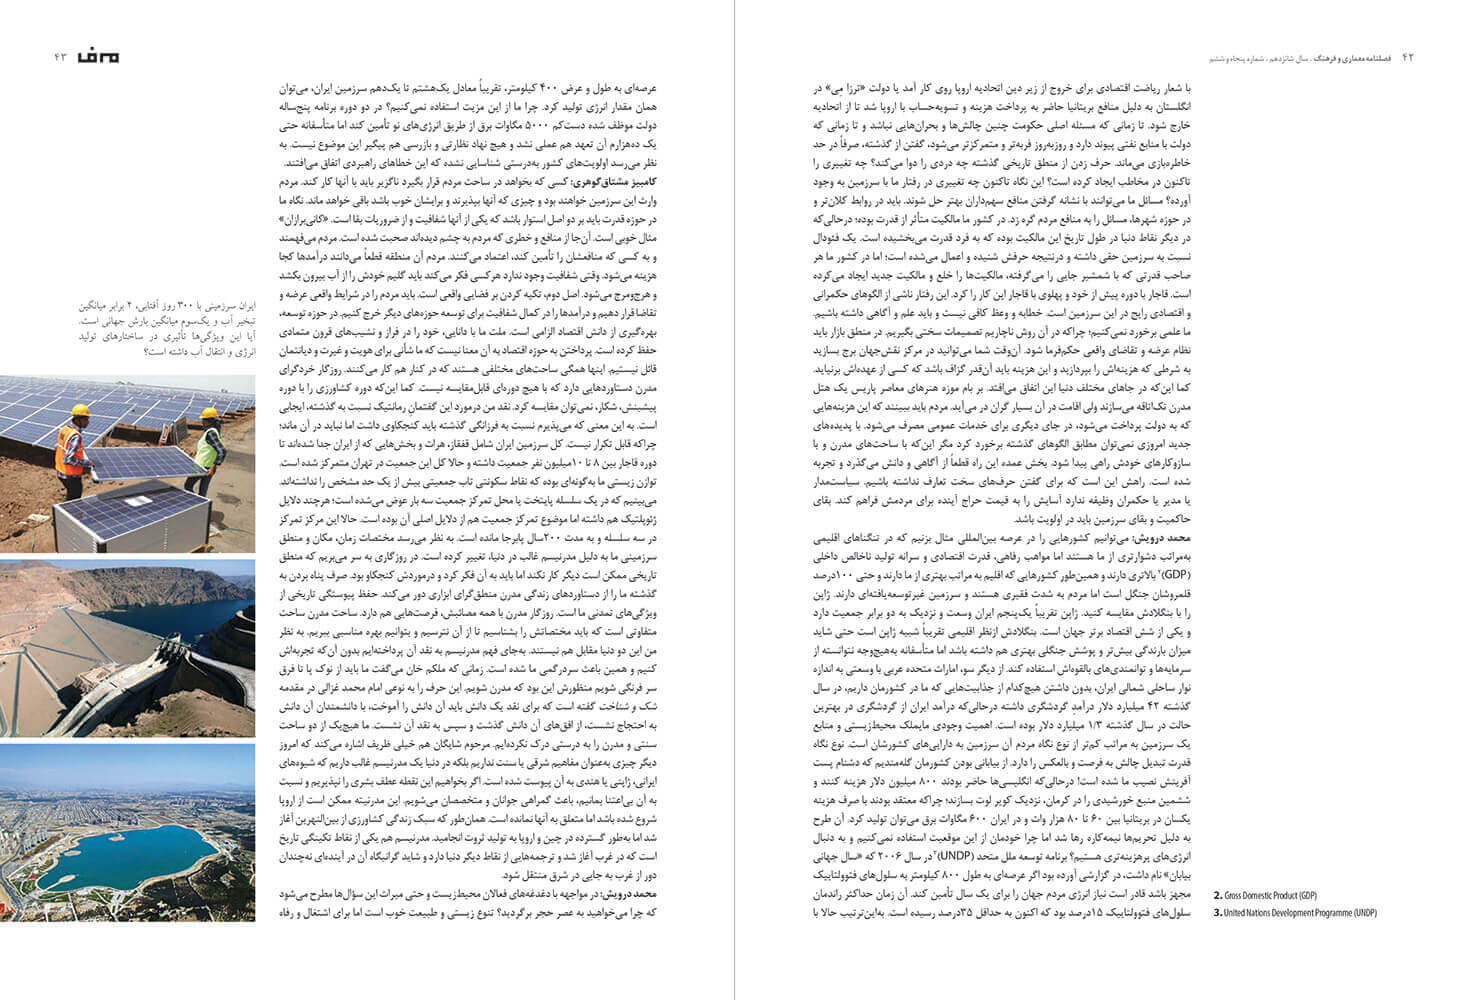 picture no. 4 of publication: Identity and Territorial challenges, author: Kambiz Moshtaq